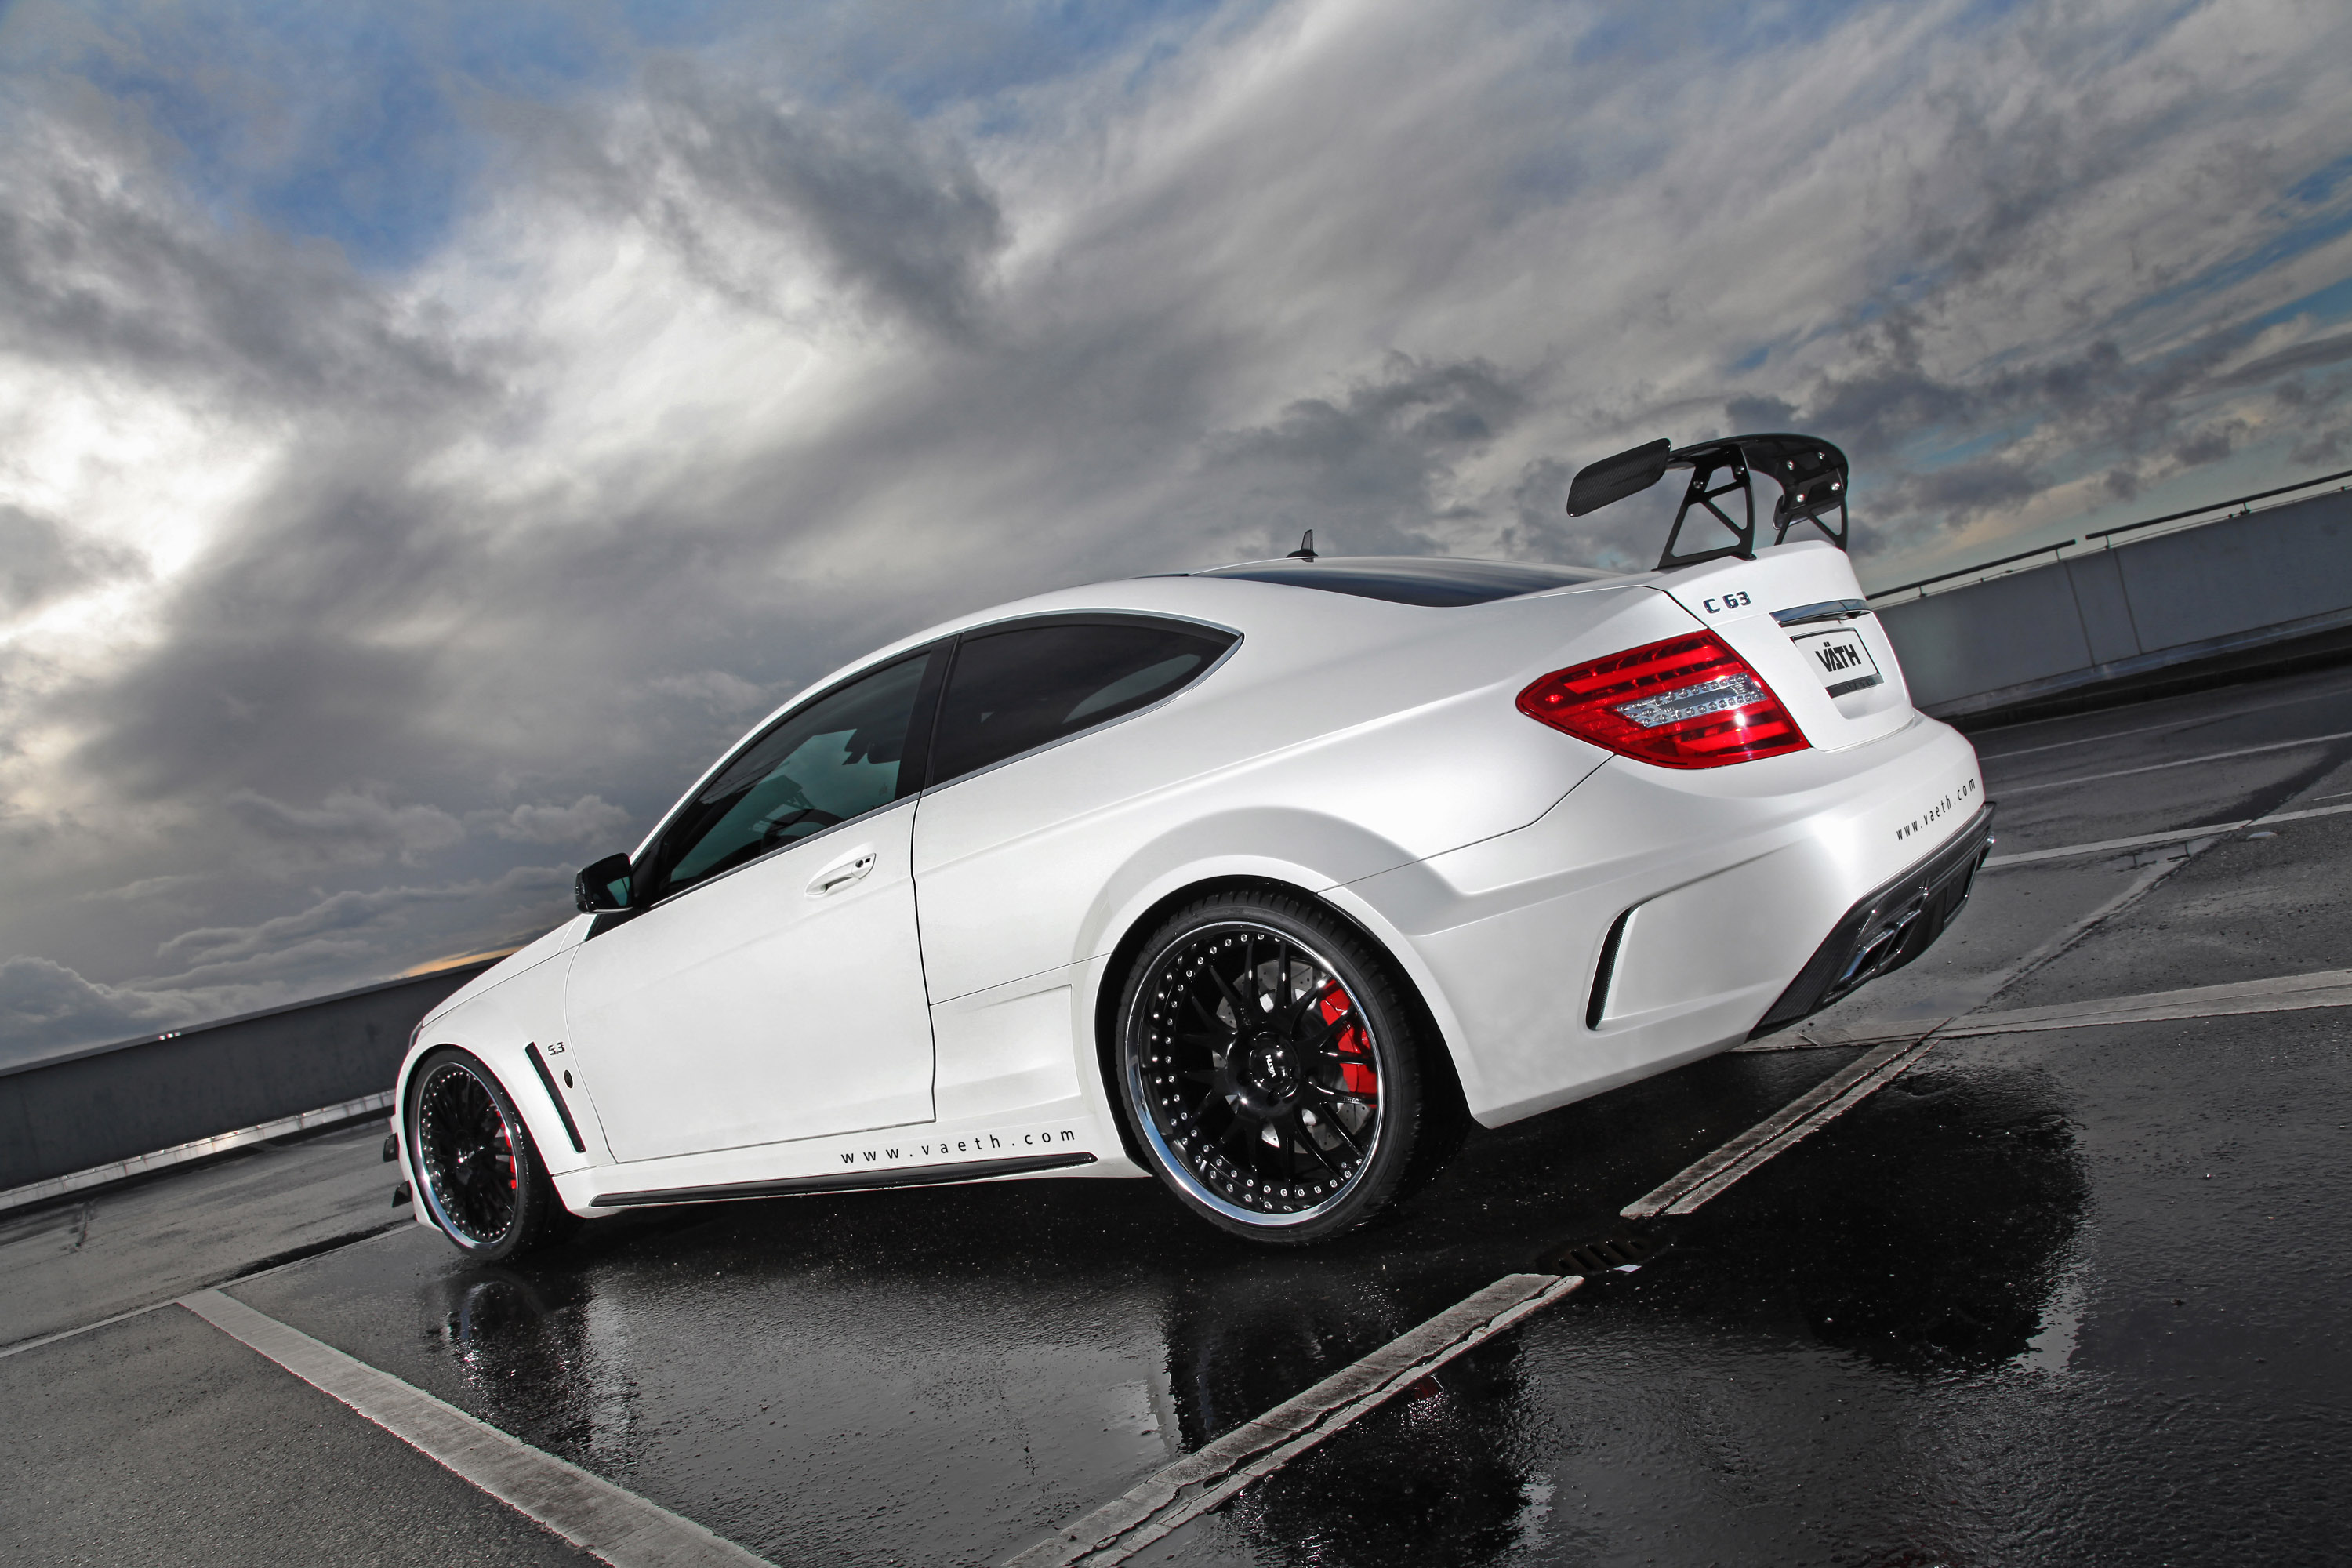 2012, Vath, Mercedes, Benz, V 63, Coupe, Supercharged, Tuning Wallpaper